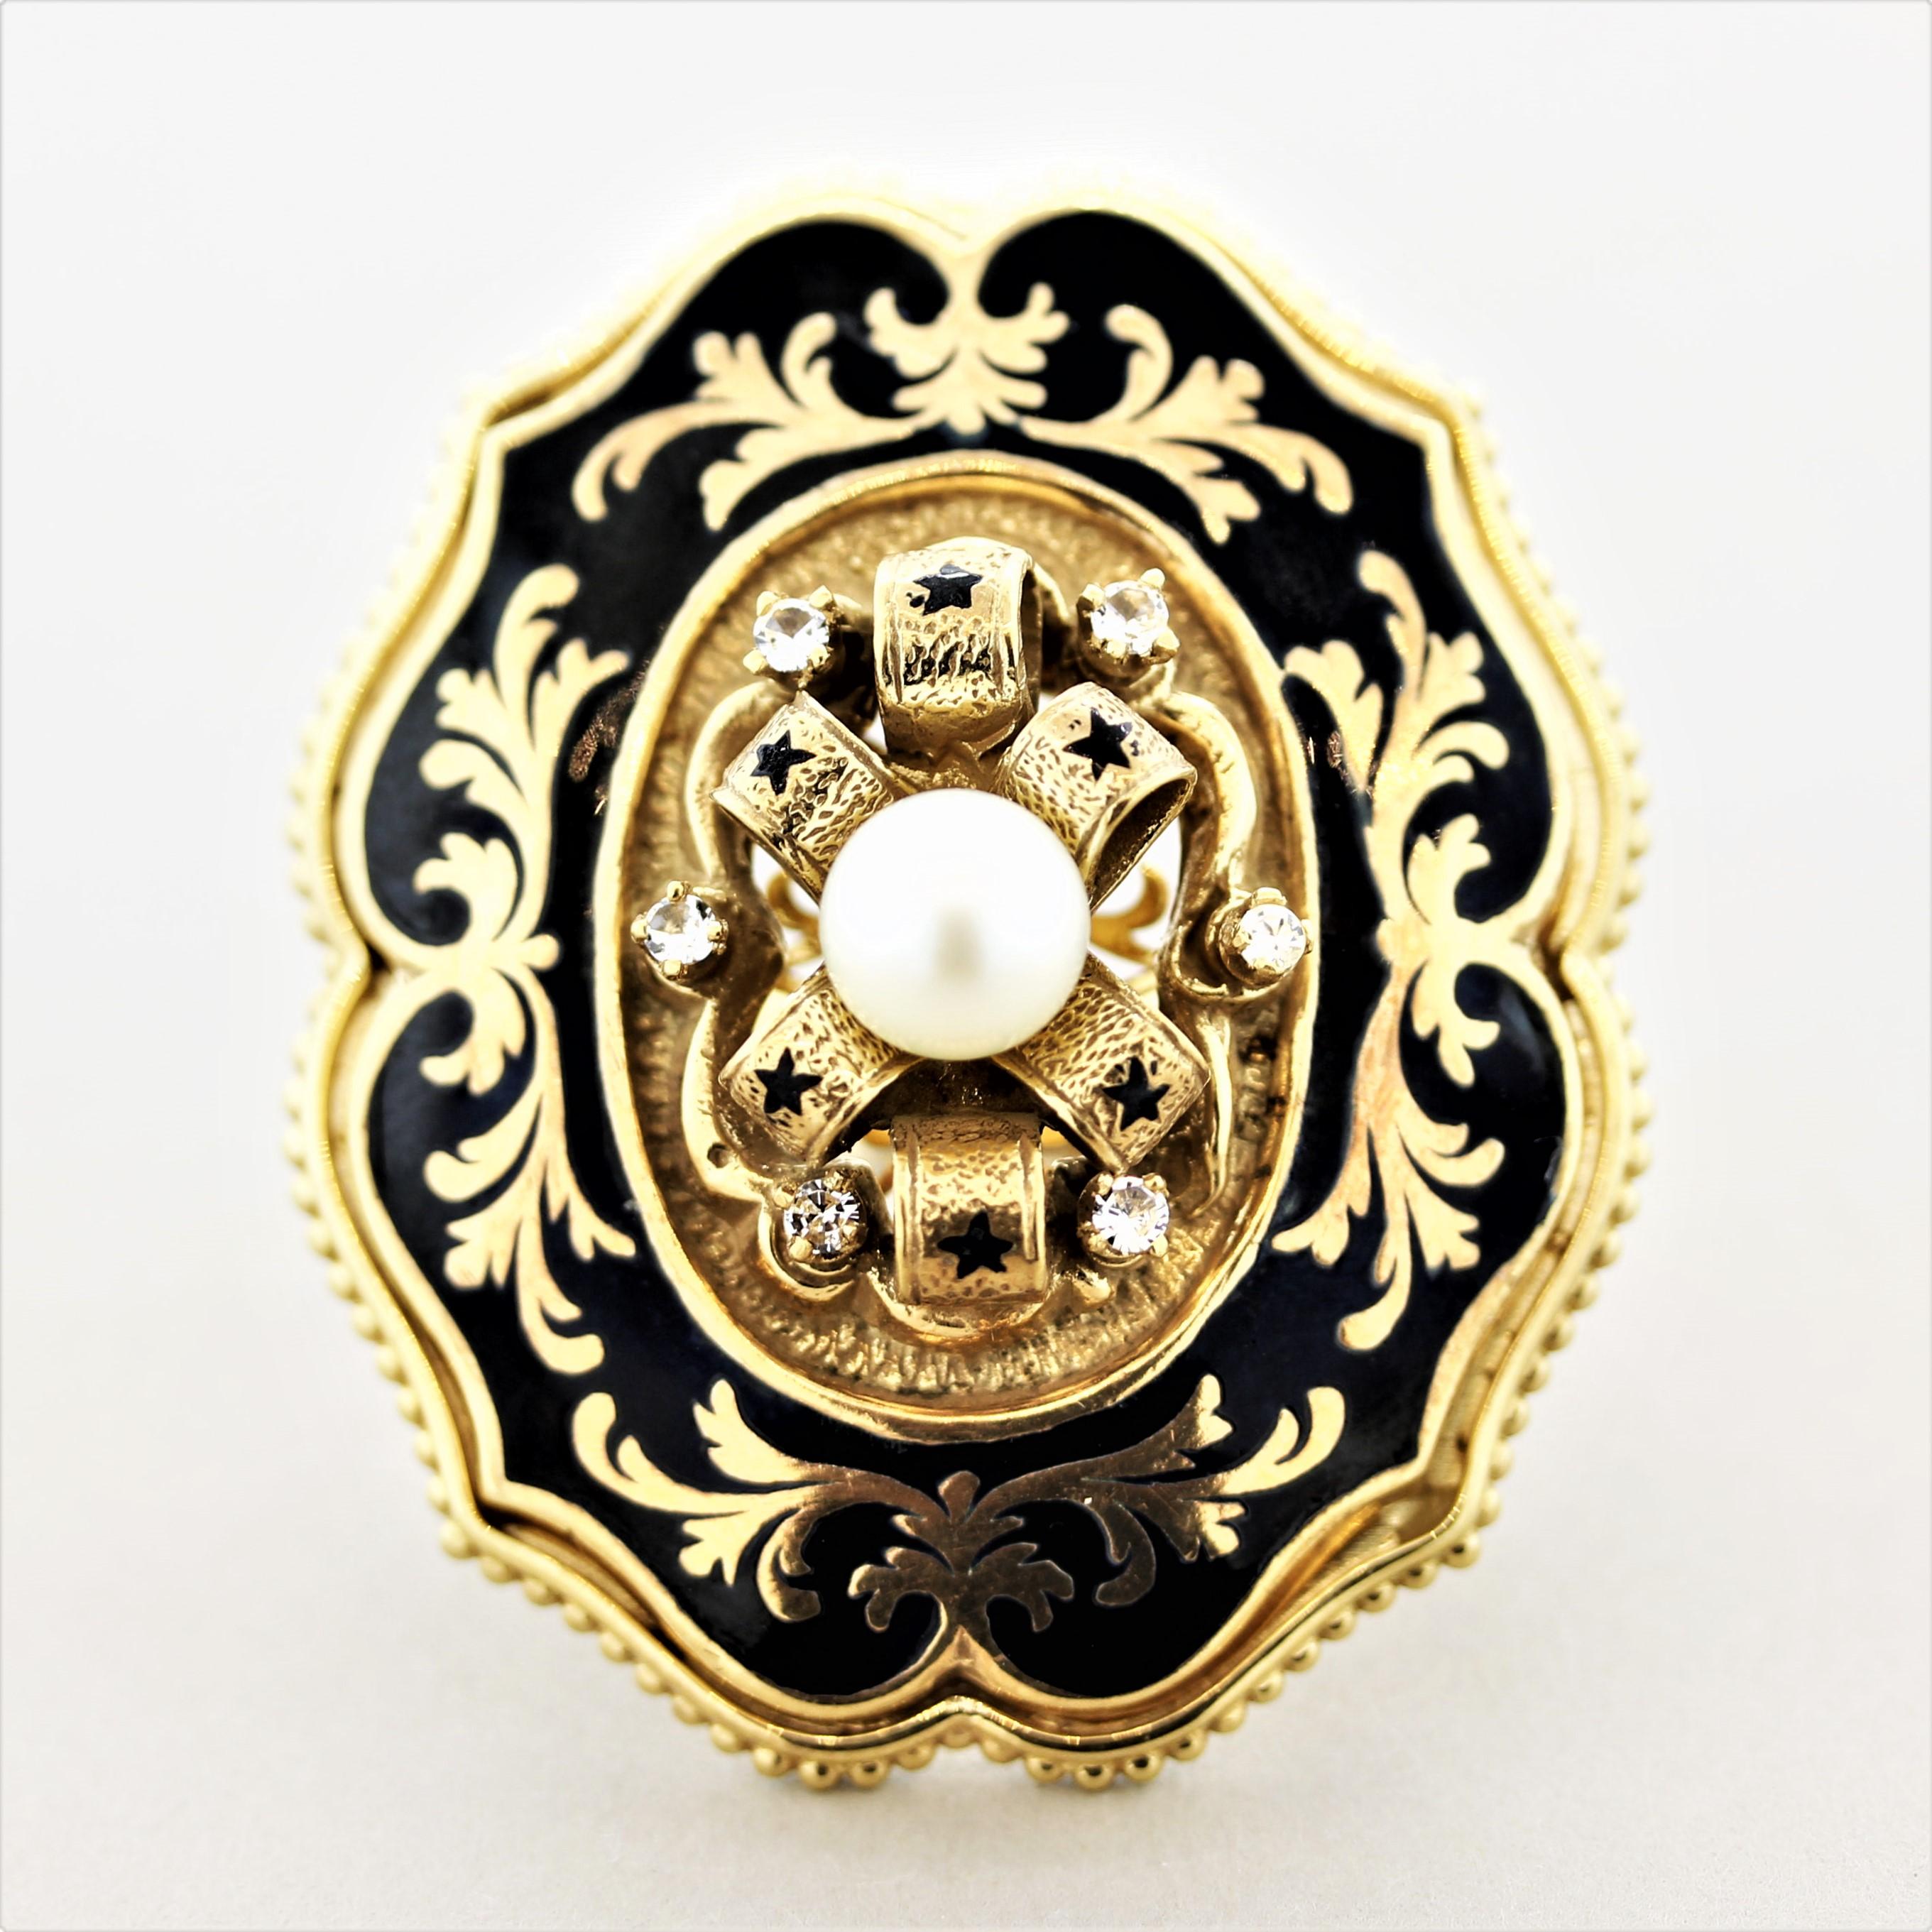 A large and elaborate cocktail ring designed in the Victorian style. It features 6 round-cut diamonds along with a sweet pearl in the center over a ribbon of gold. Hand-painted black enamel decorated the top of the ring with stars on the ribbon